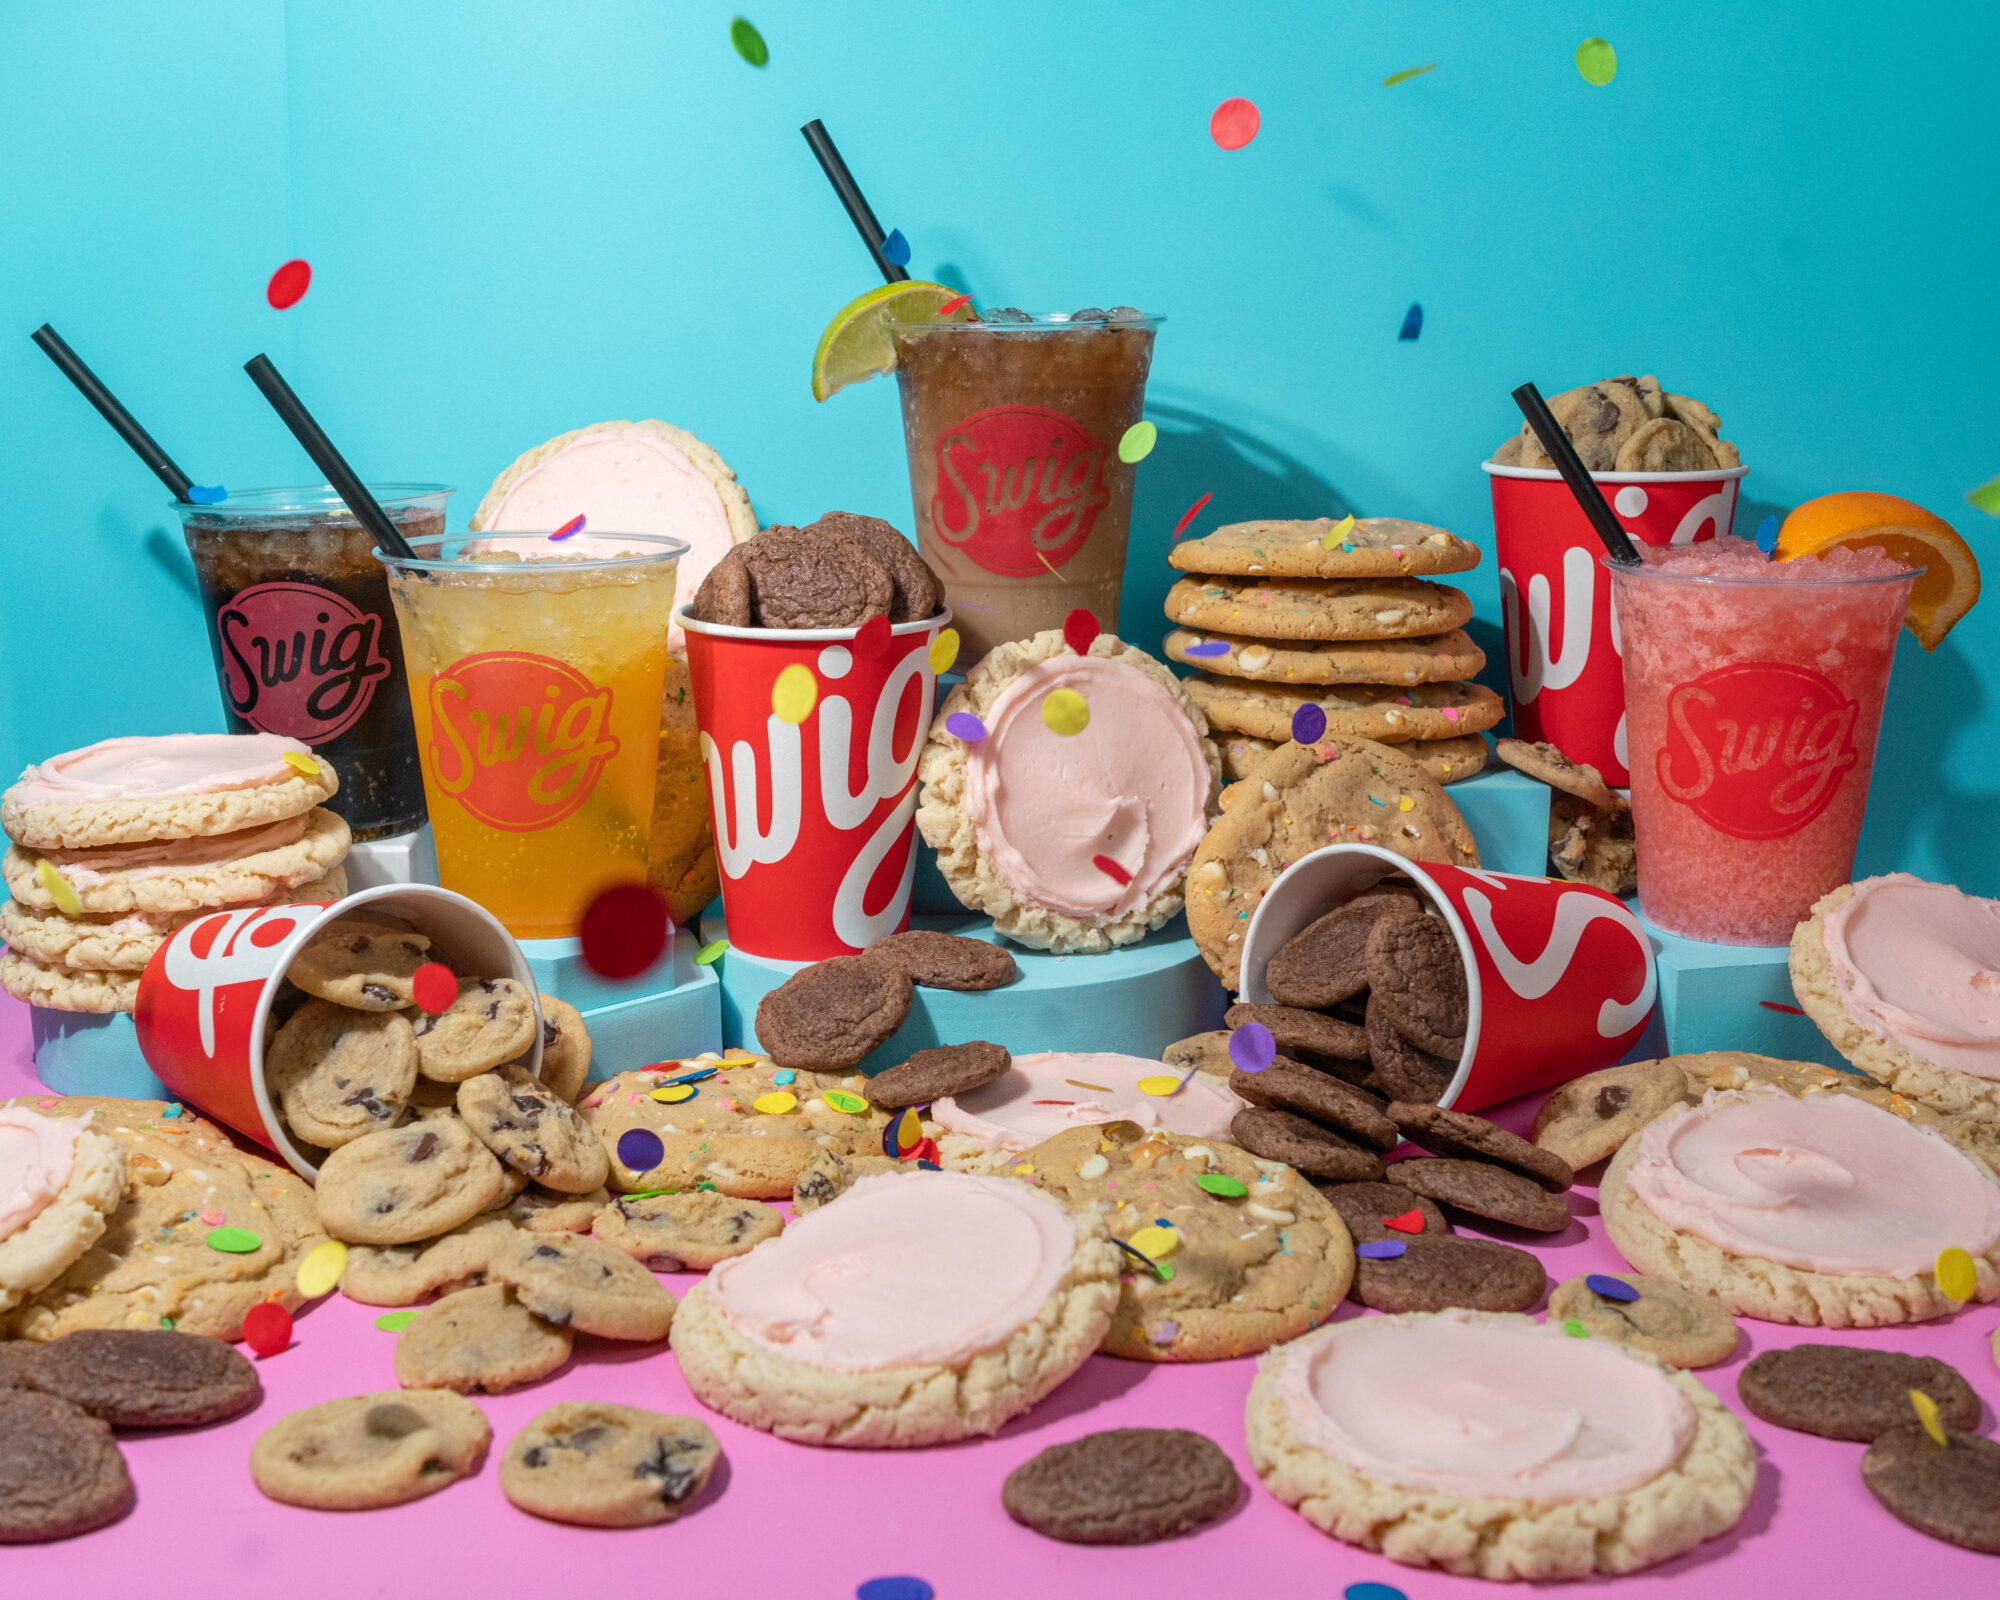 Swig drinks and cookies set up to celebrate Swig's 50th store opening